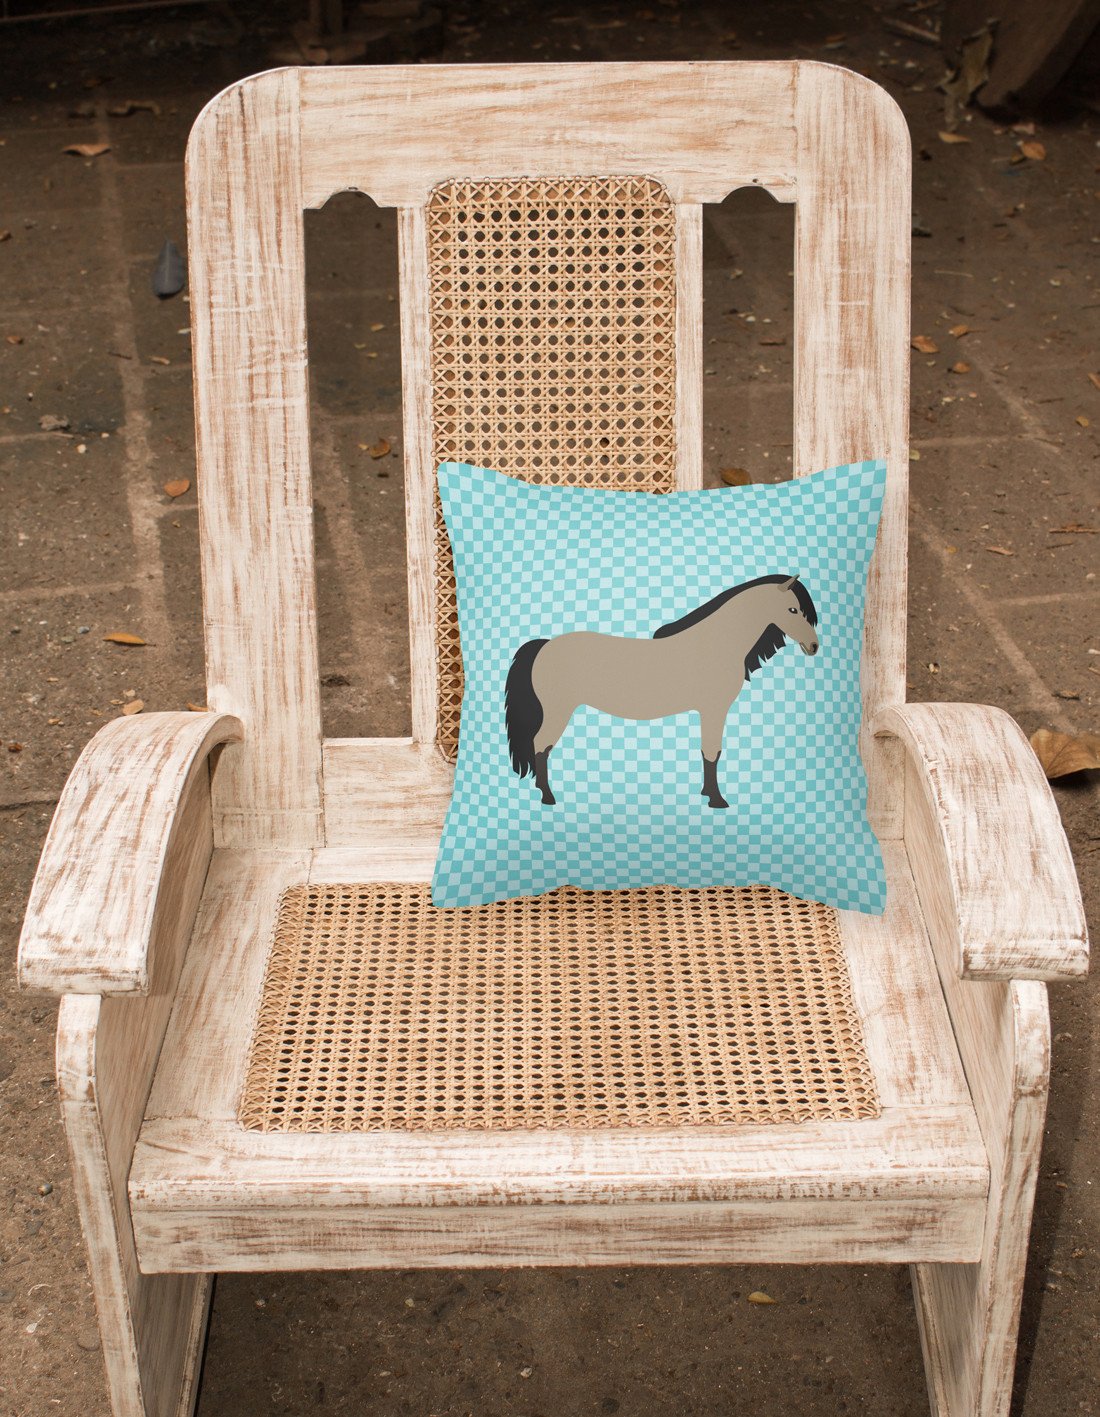 Welsh Pony Horse Blue Check Fabric Decorative Pillow BB8084PW1818 by Caroline's Treasures